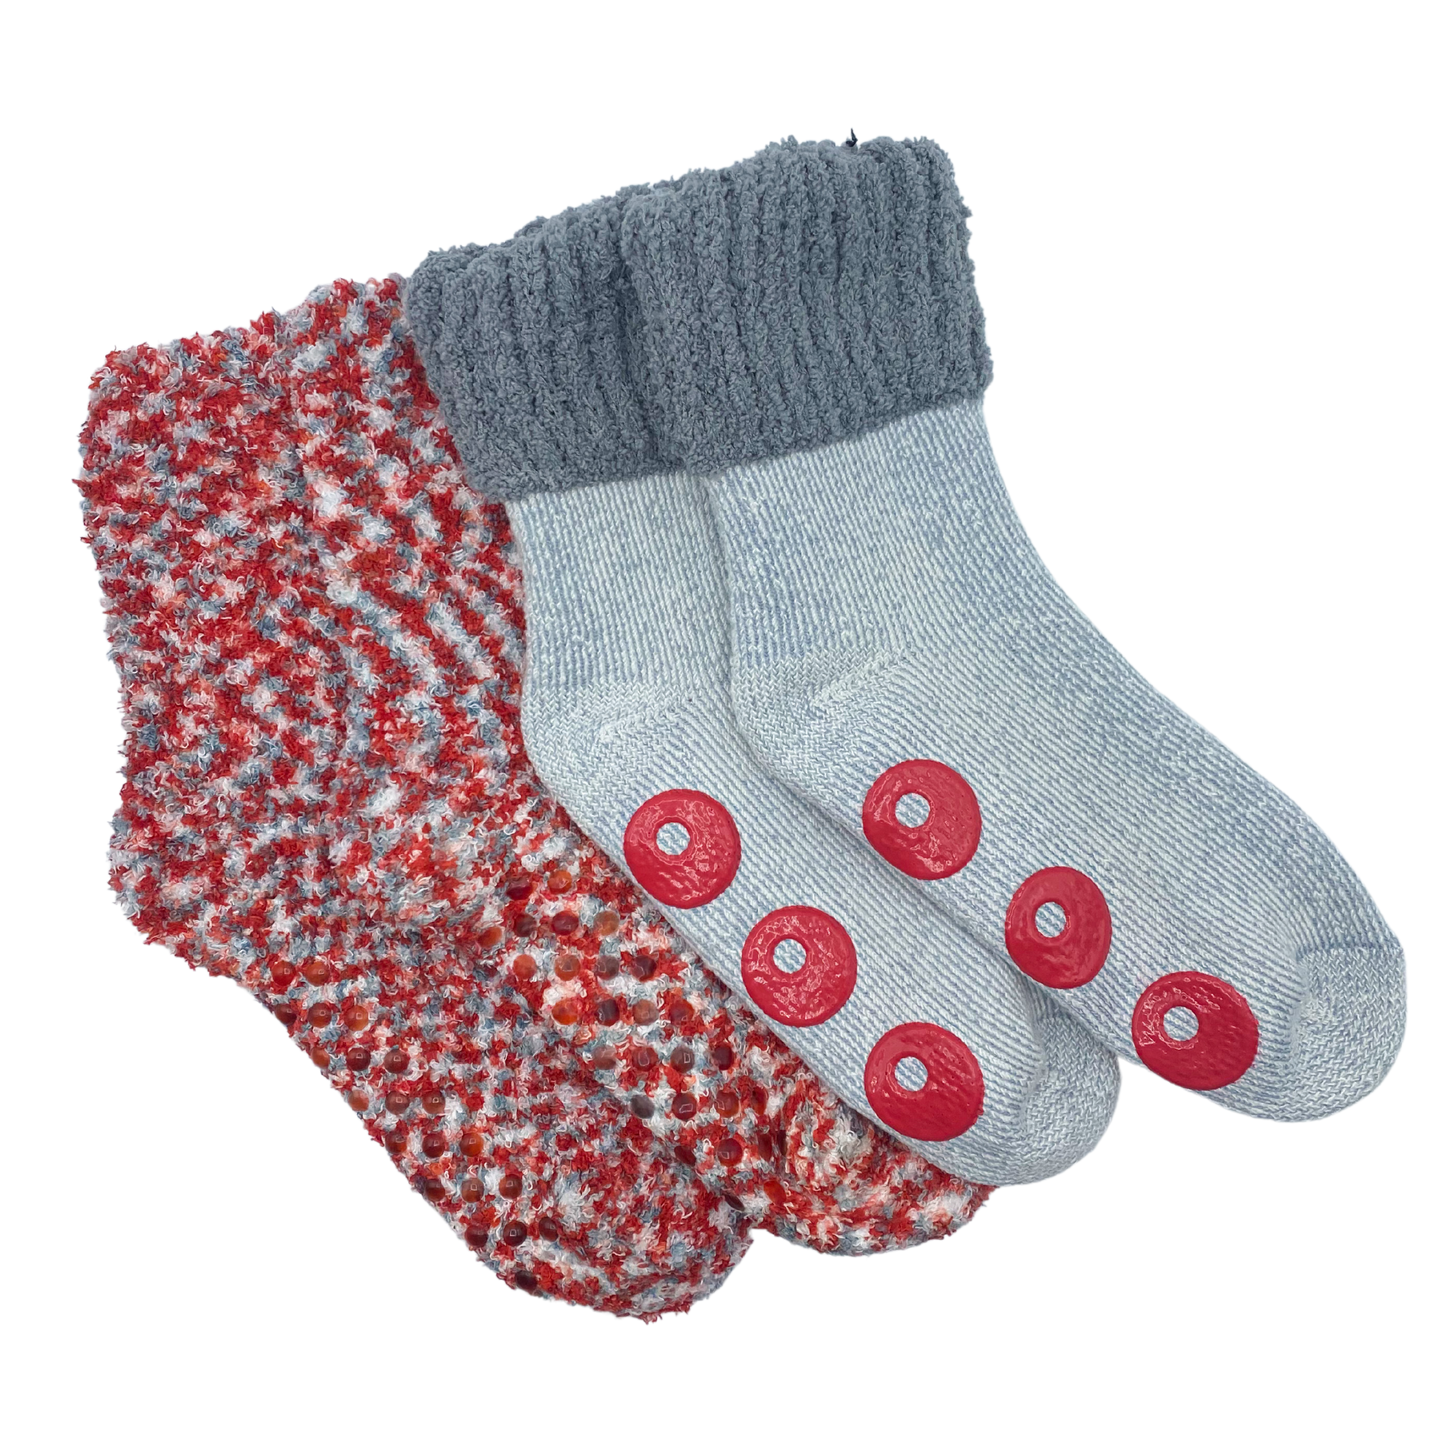 One white fuzzy sock featuring red HO HO HO shaped rubber gripper.